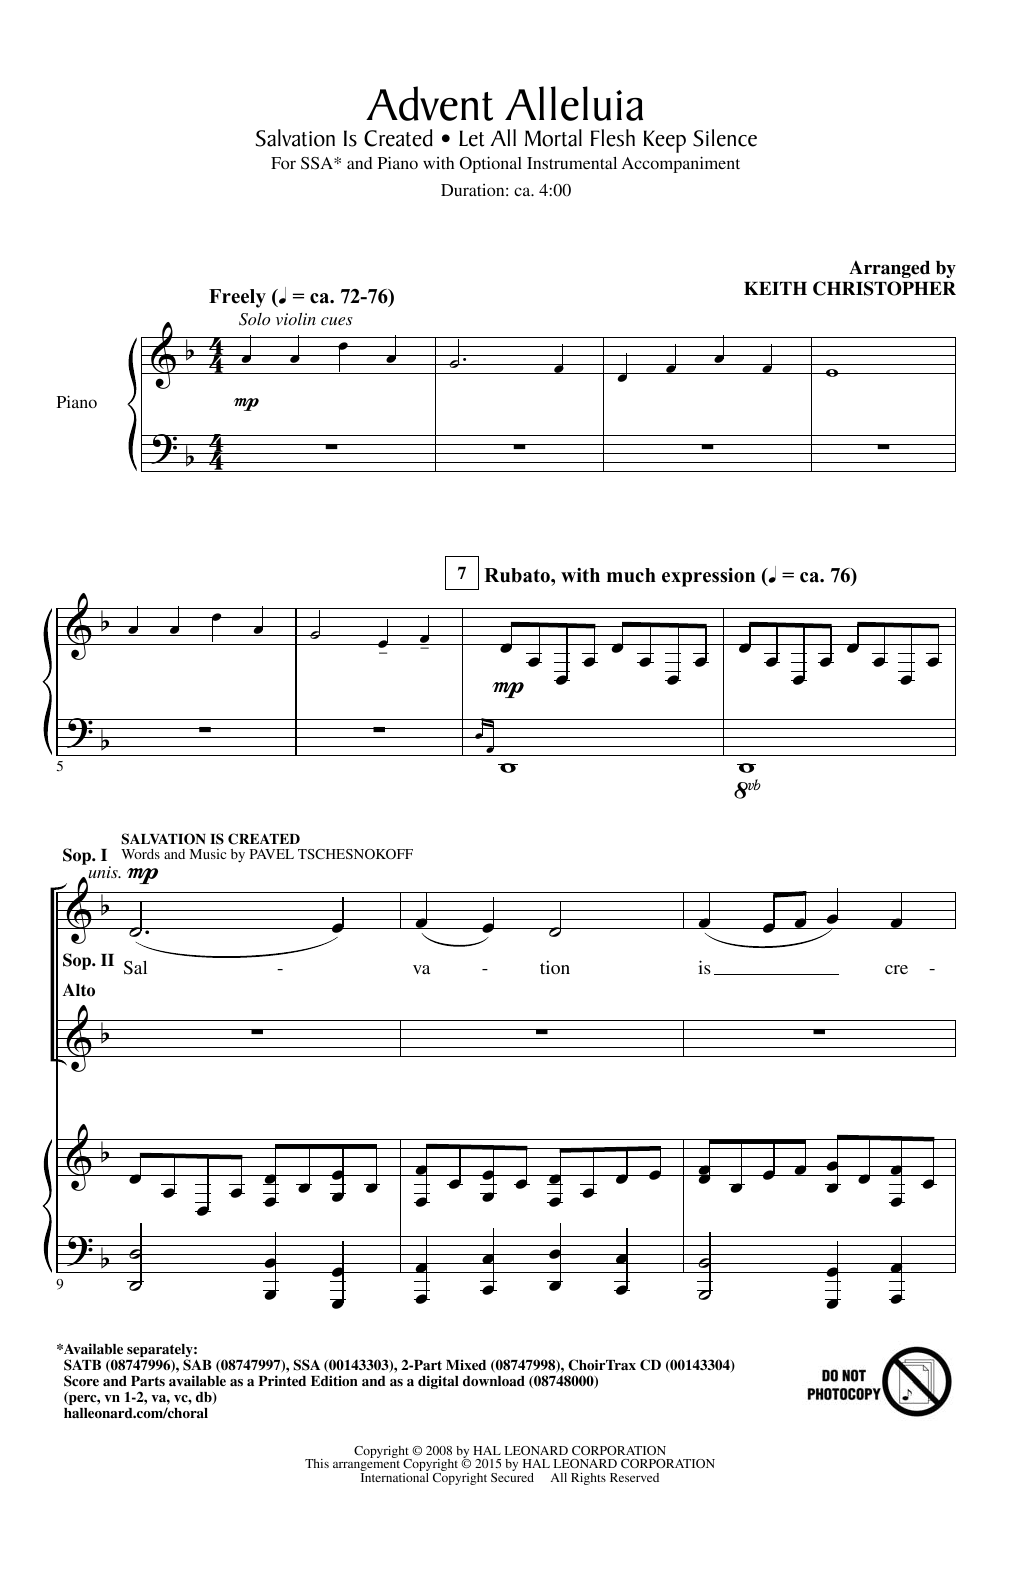 Download Keith Christopher Advent Alleluia Sheet Music